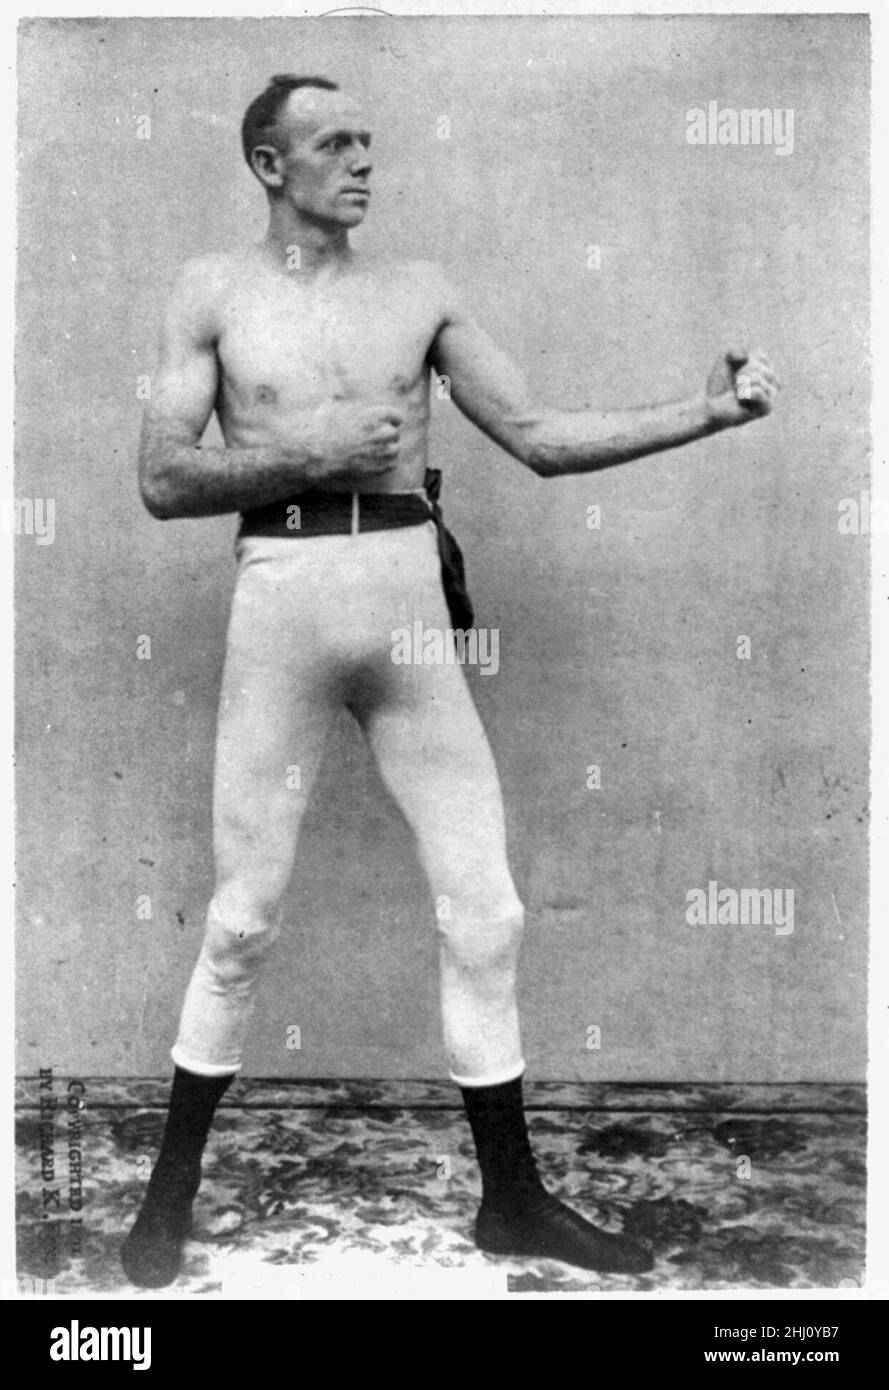 Bob Fitzsimmons - World Heavyweight Champion from 1897 to 1899 and the first triple weight world champion in history - late 1800's Stock Photo